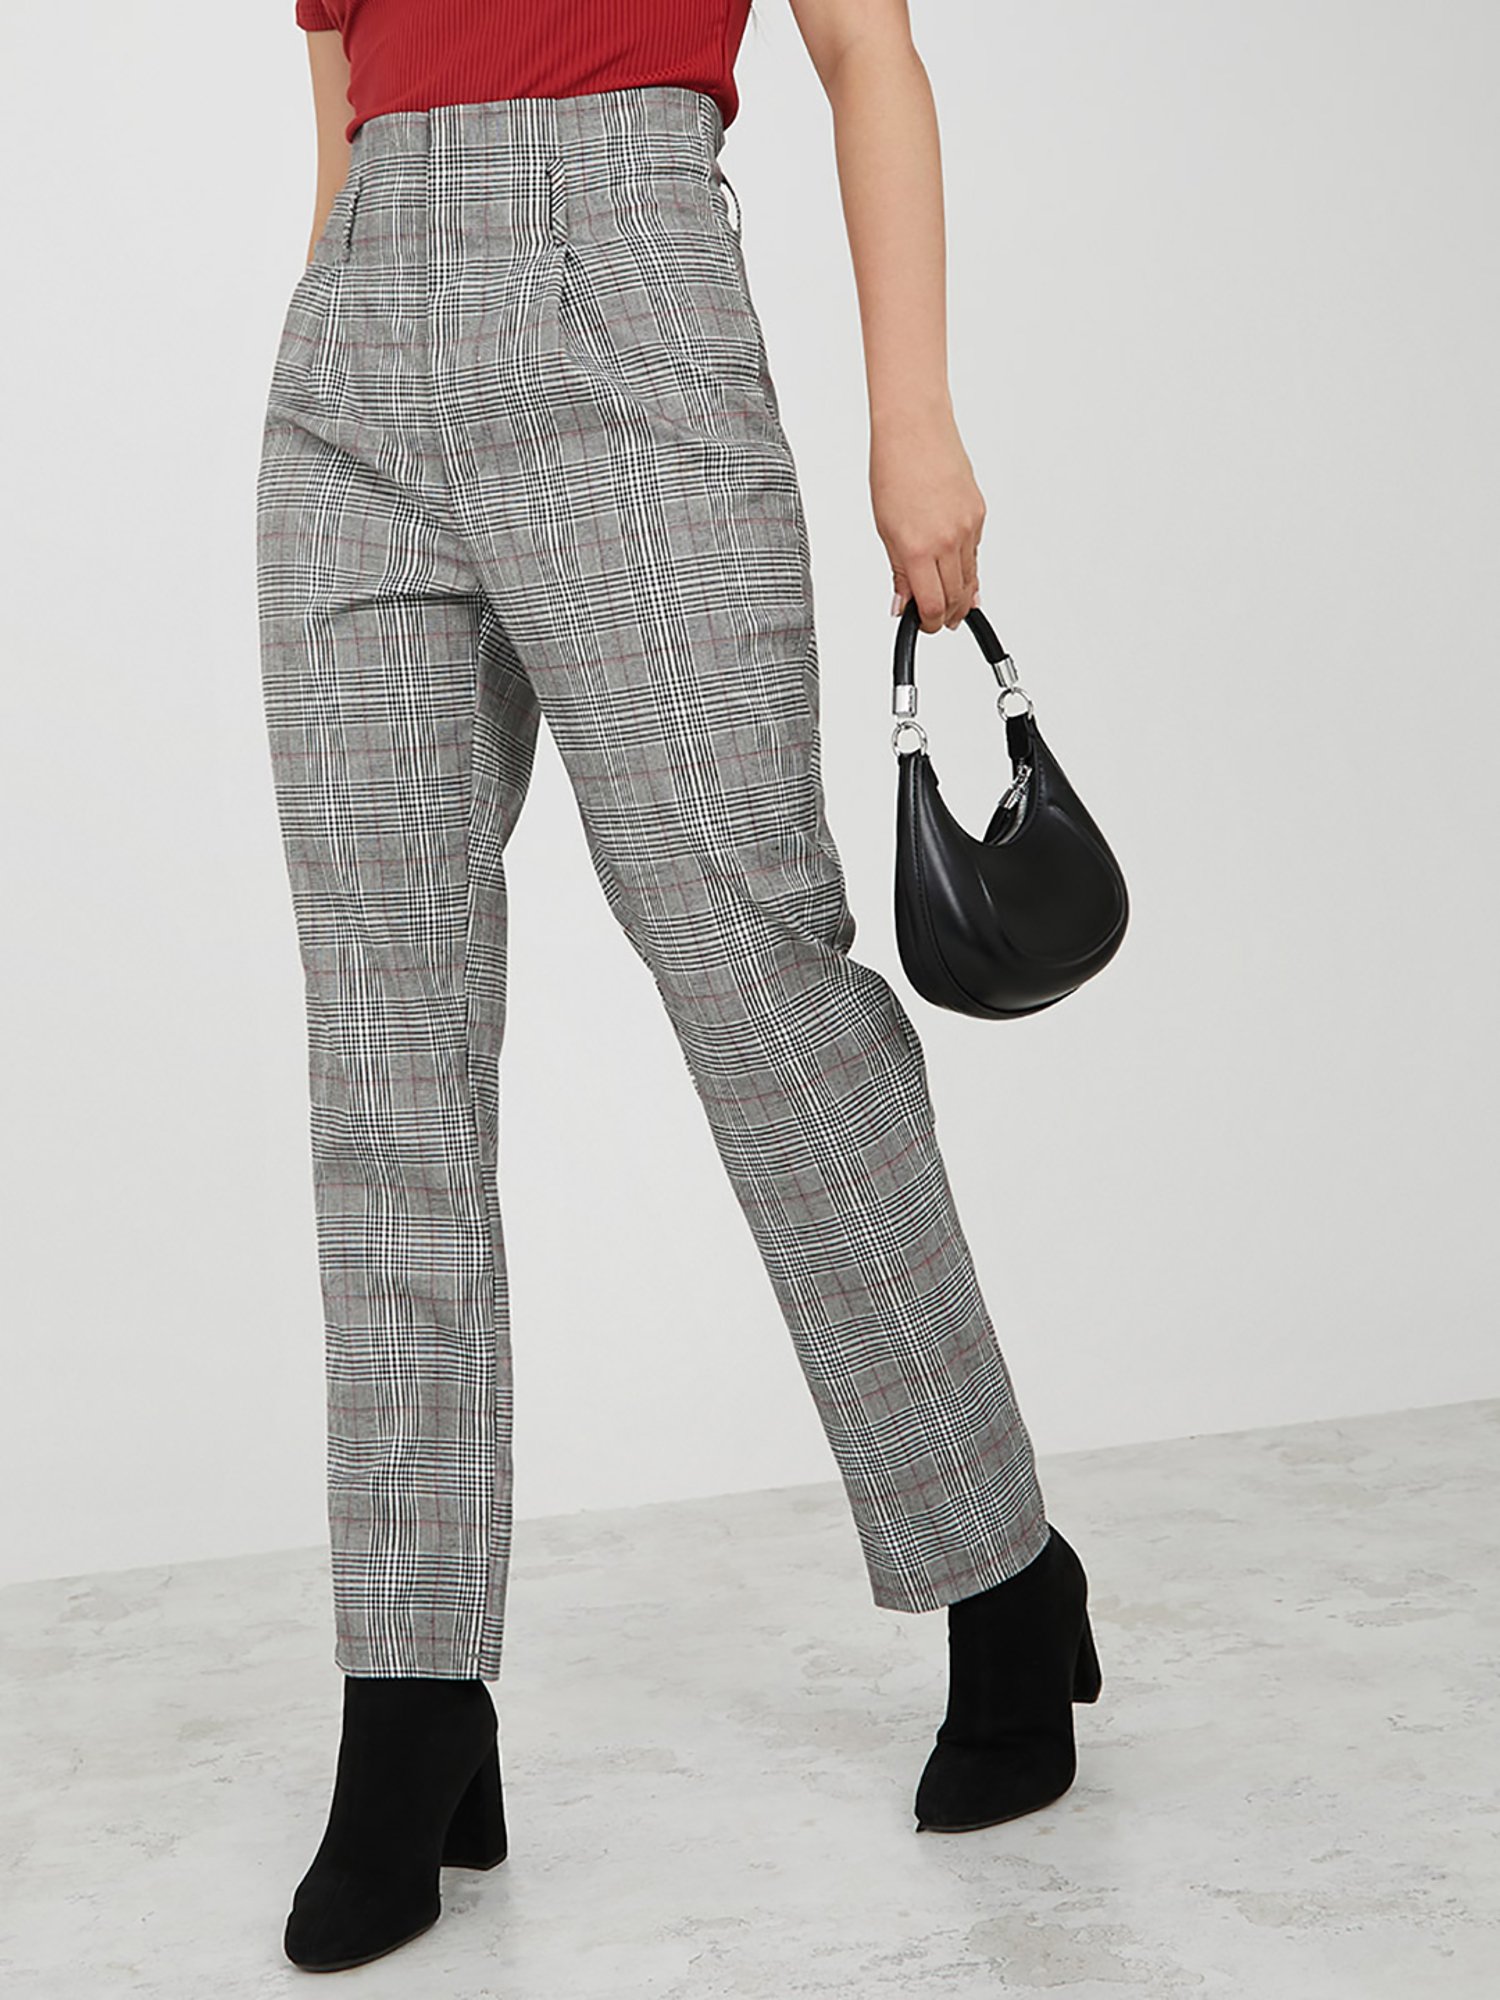 SheIn Women's Elastic High Waist Flare Pants Houndstooth Print Wide Leg  Long Trousers Black White XS at Amazon Women's Clothing store